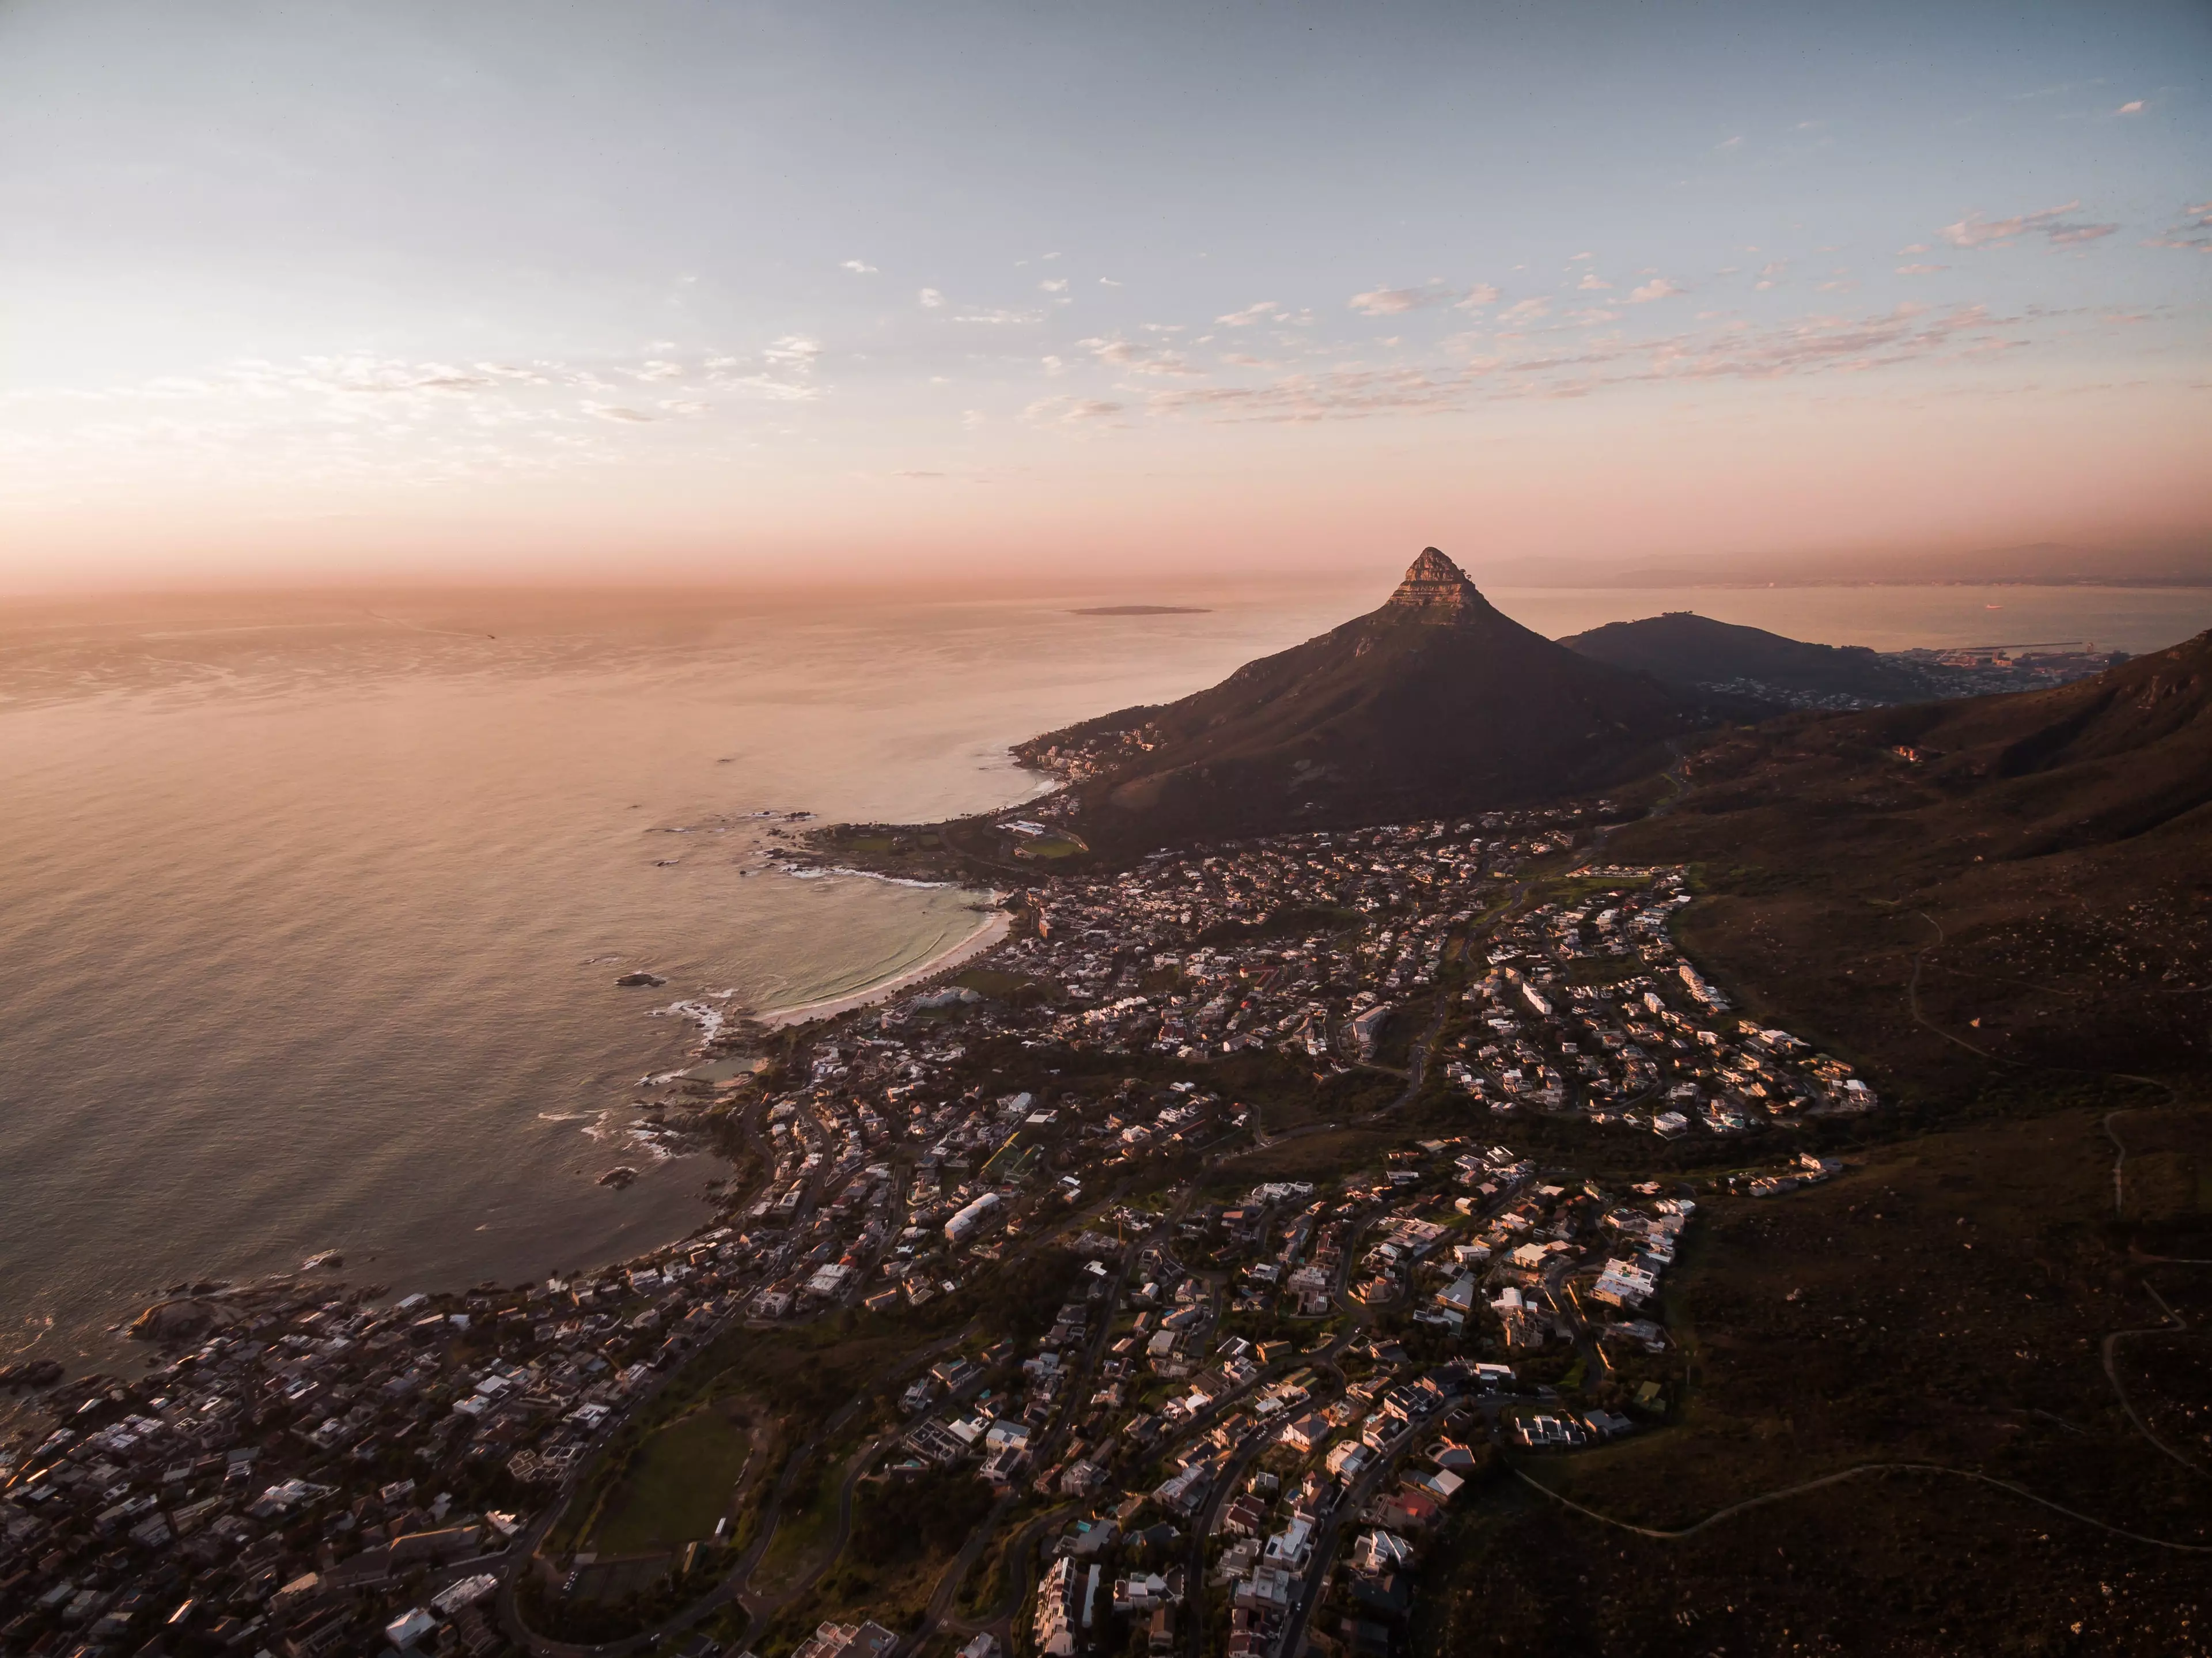 The winter edition of 'Love Island' will be set in the idyllic Cape Town, South Africa. (